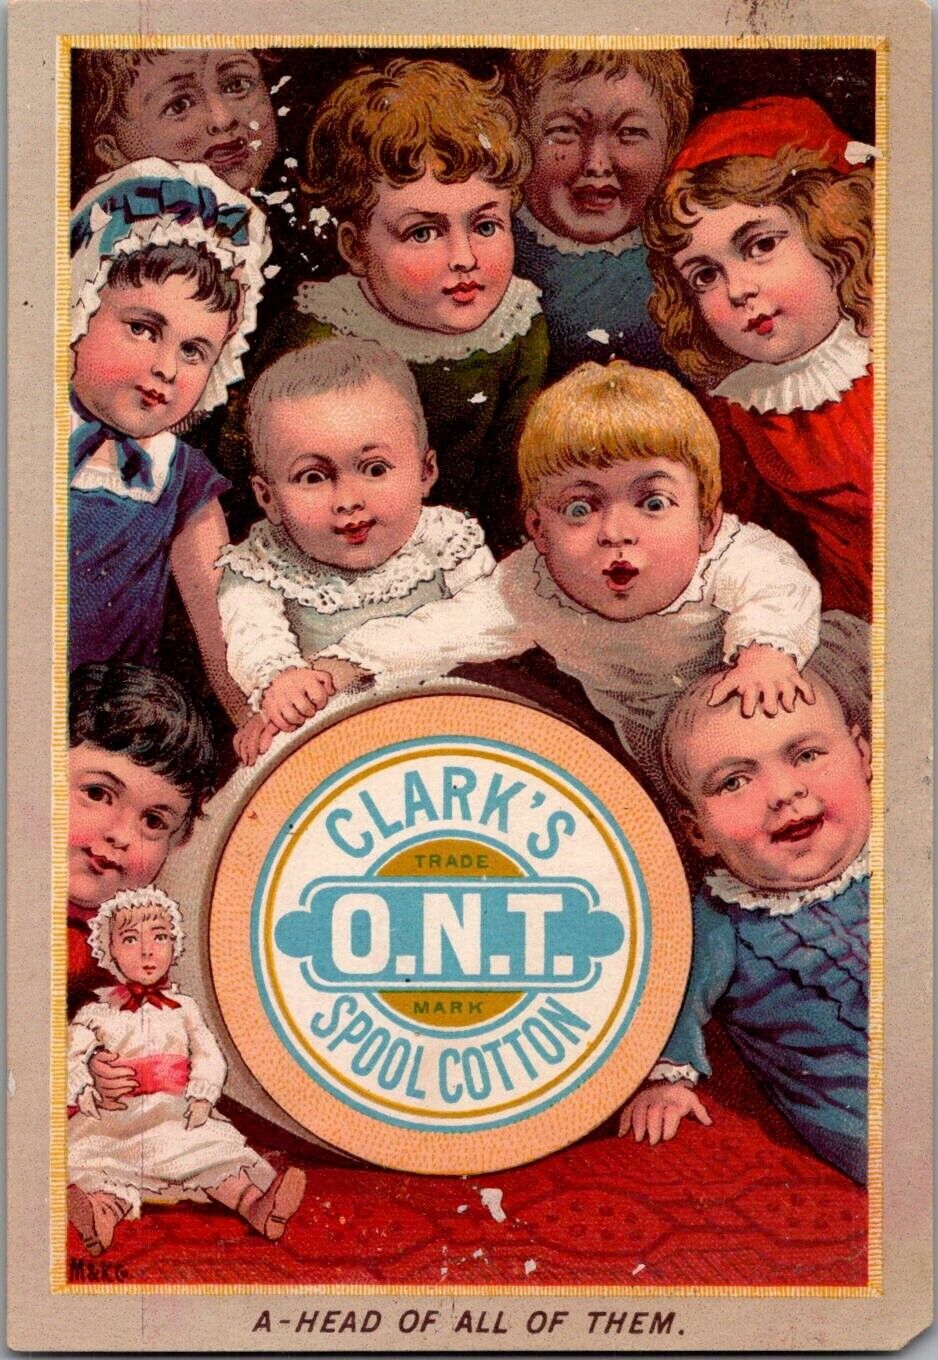 Clark\'s ONT Spool Cotton A Head of All of Them BABIES Victorian Trade Card